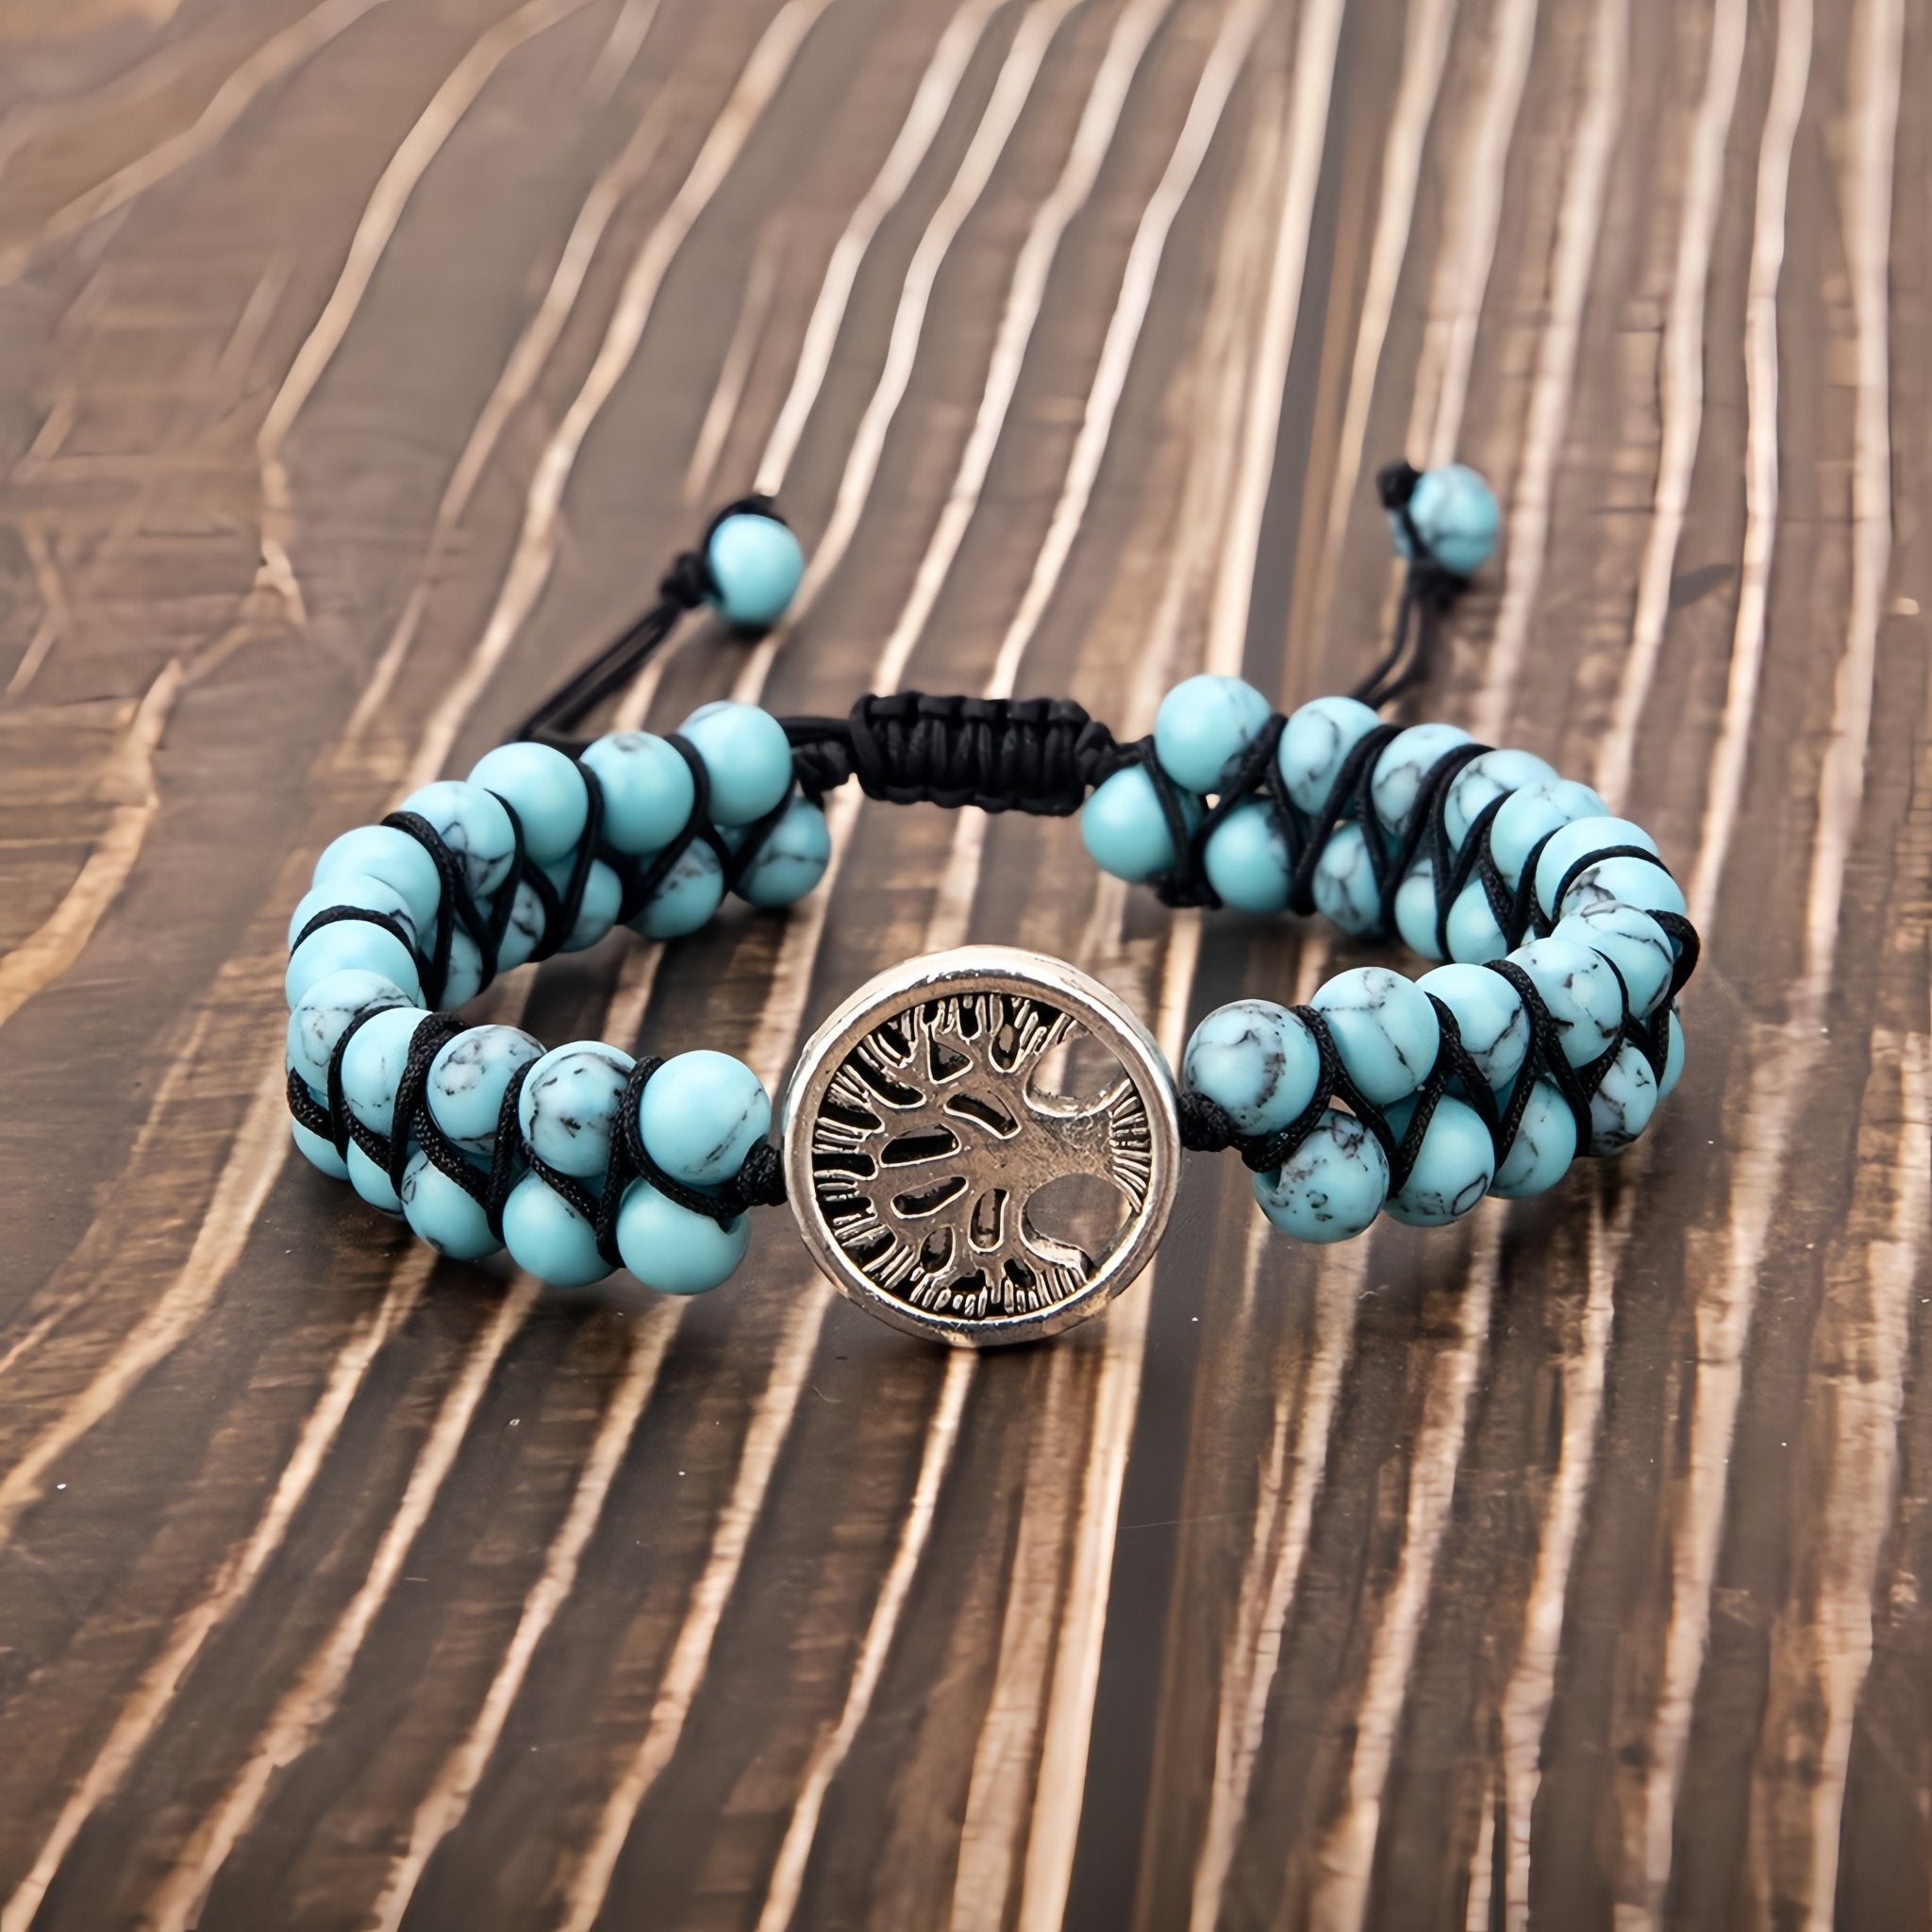 Turquoise yoga bracelet with a central silver tree of life design charm.